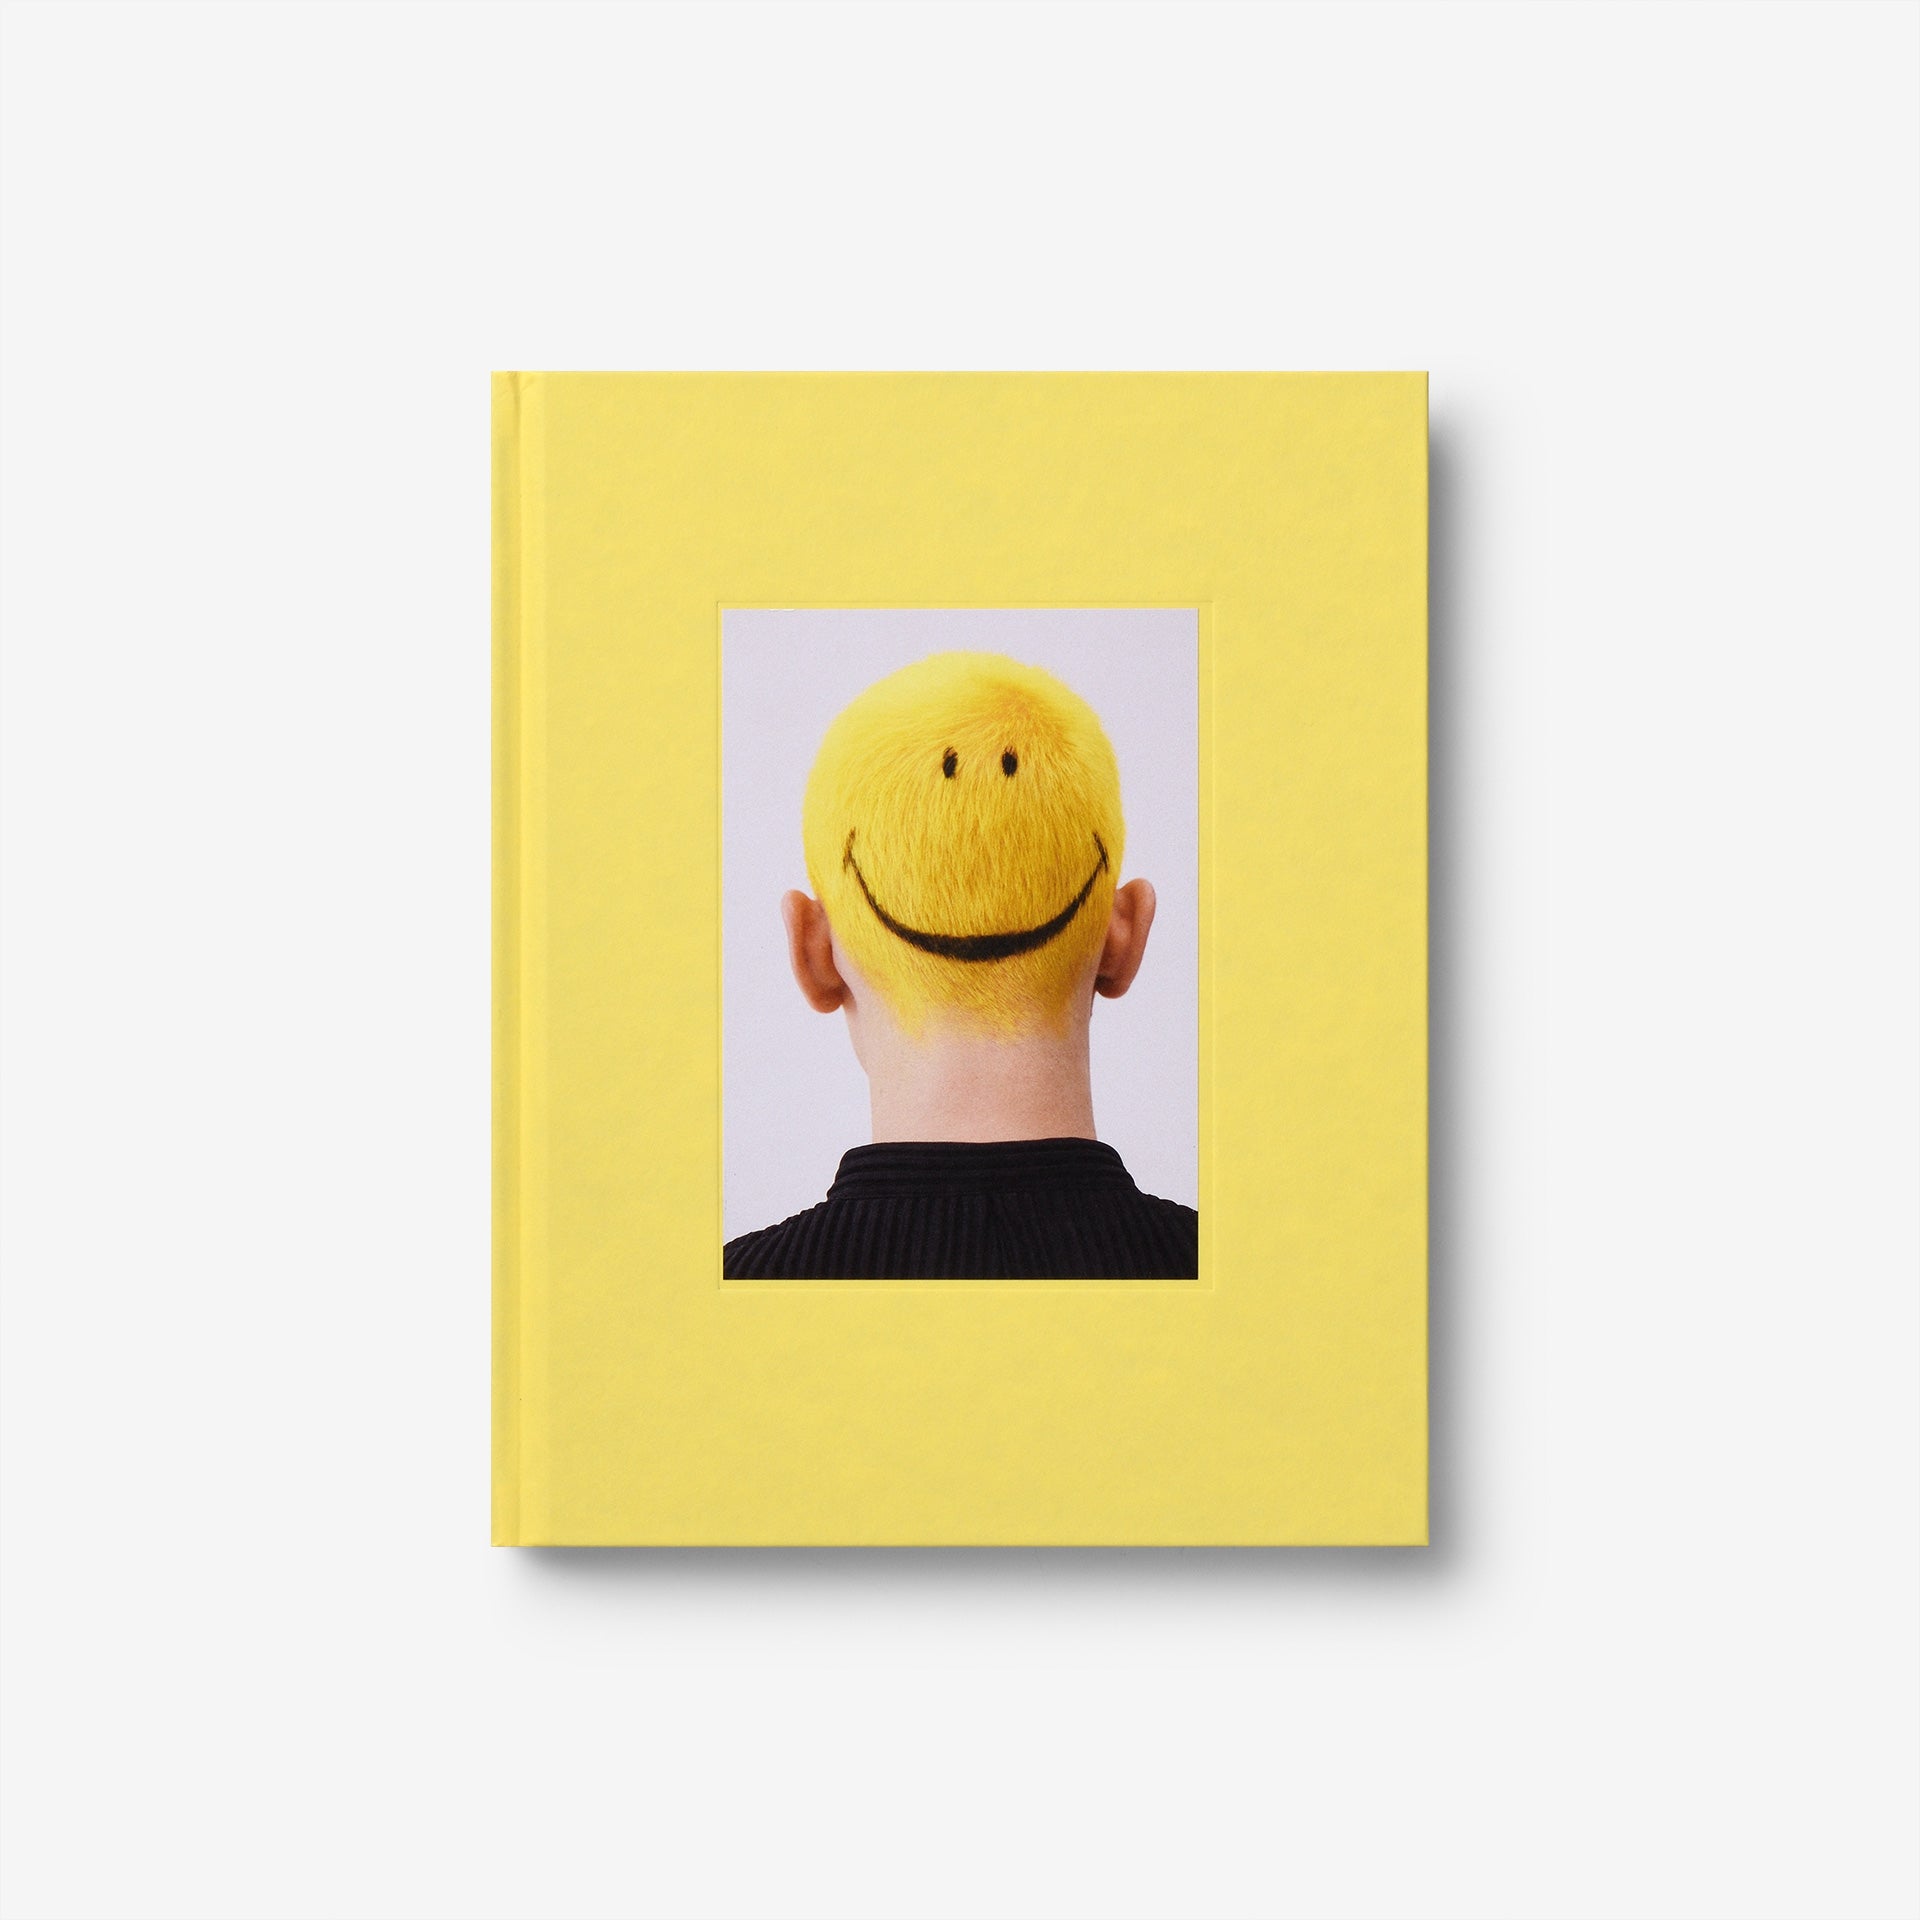 The Motif Magazine Issue 2: The Happy Motif (Cover 2 / Yellow)